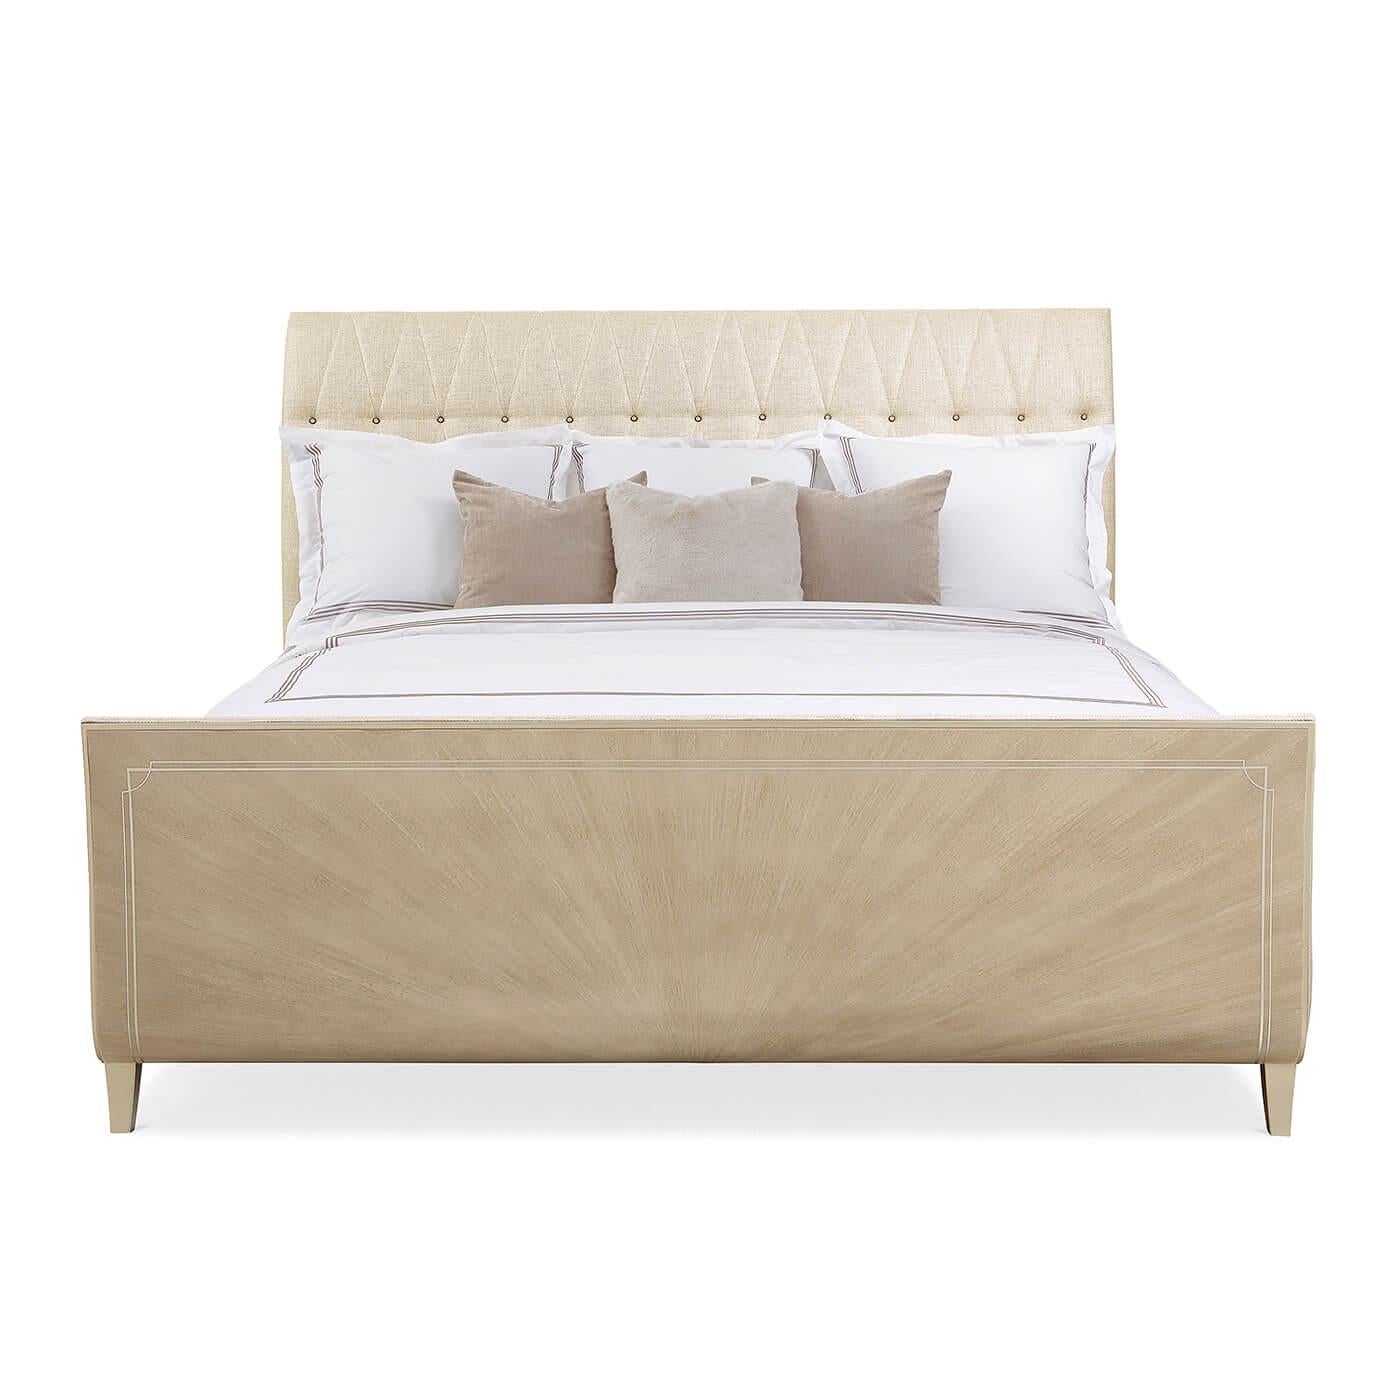 An Art Deco-Style sleigh bed with an upholstered headboard featuring a diamond tufted pattern with glass buttons. It has a curved footboard crafted with a stunning Koto veneer in a radiating fan pattern in our Winter Wheat finish. Its curved feet